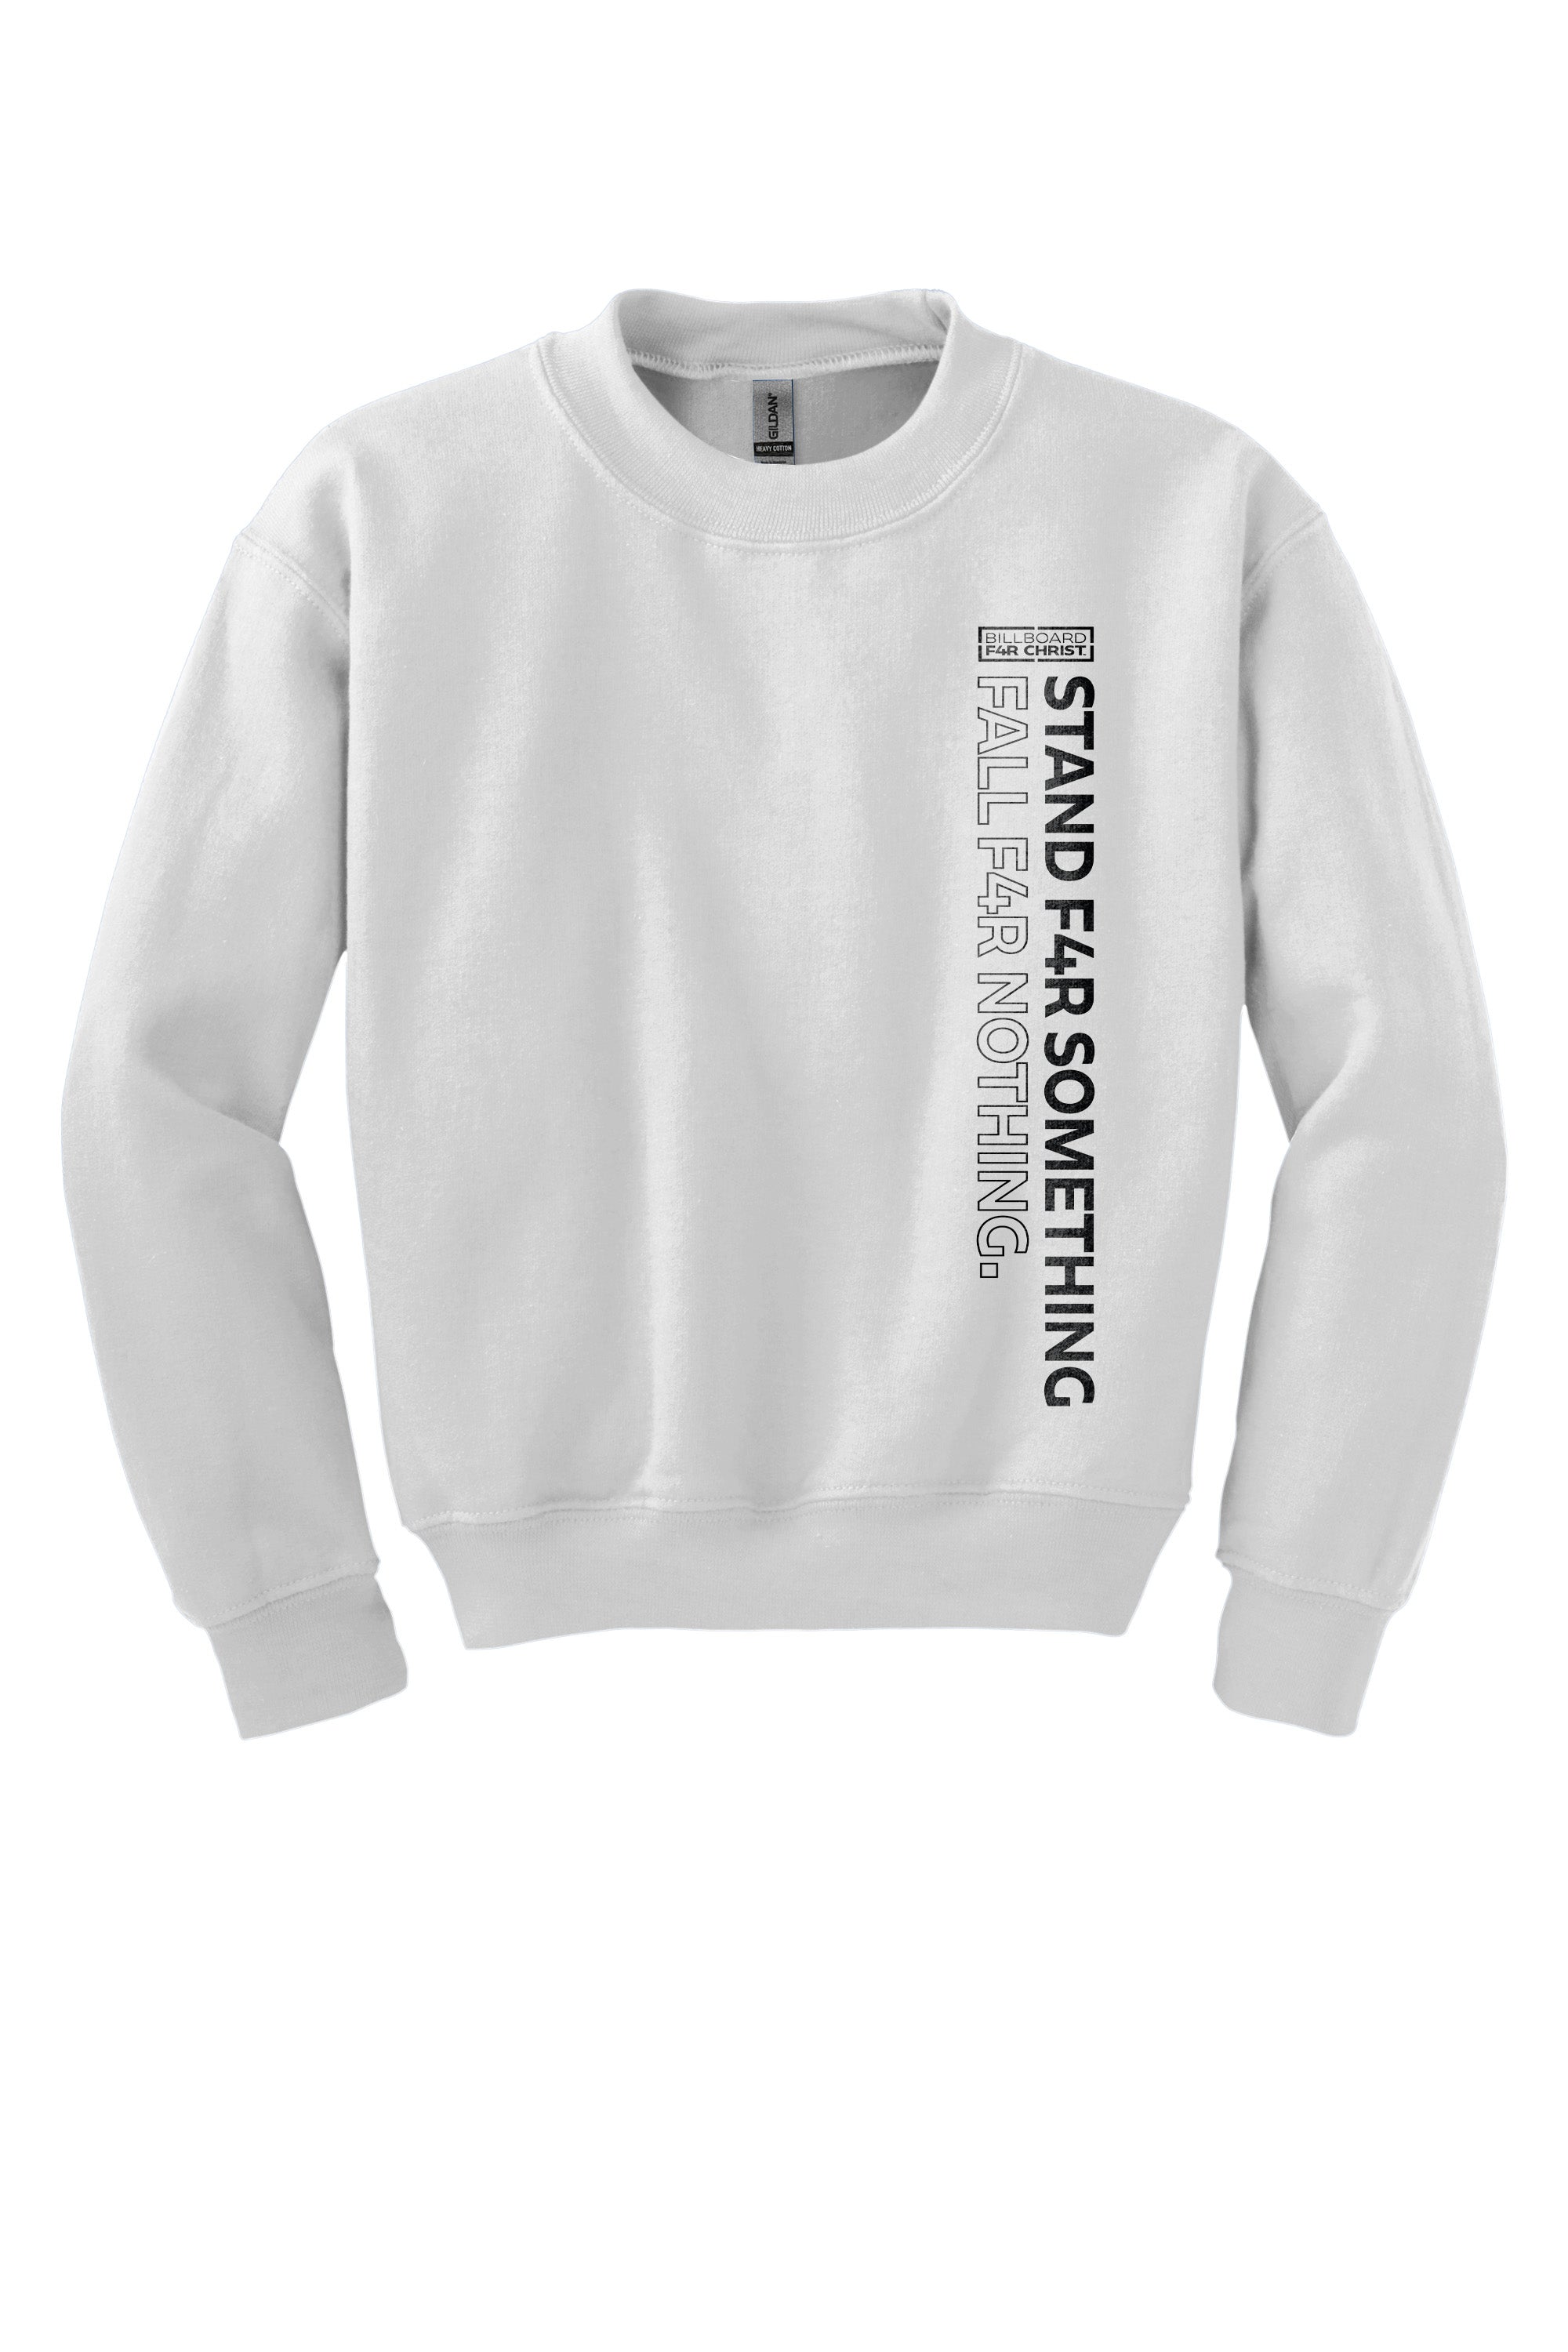 Stand F4R Something Youth Crewneck